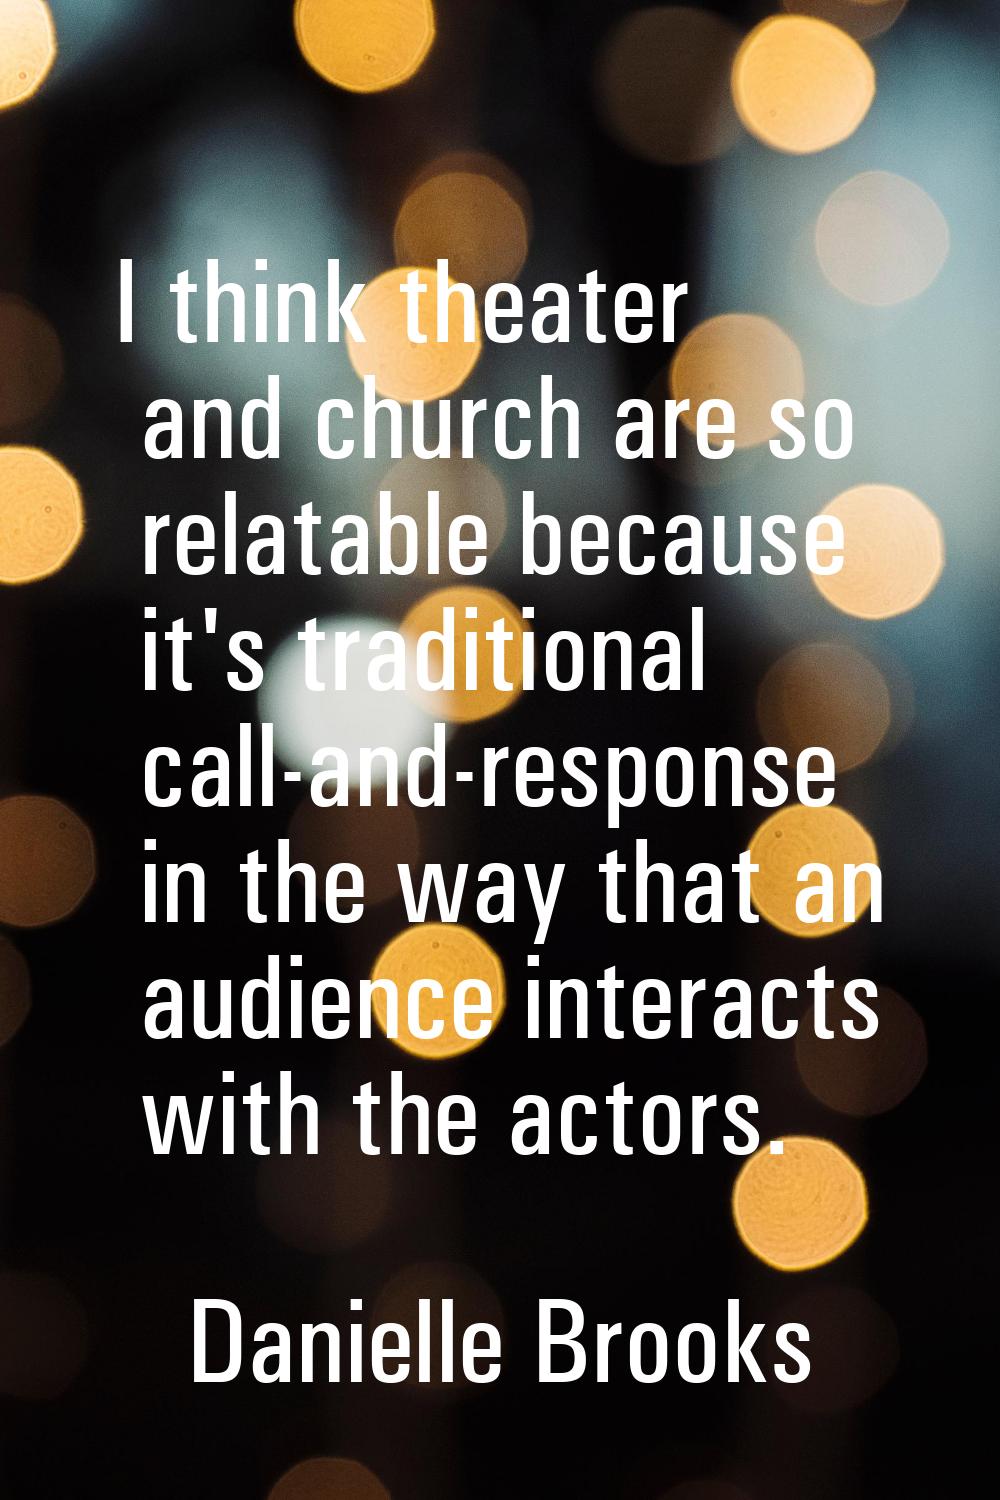 I think theater and church are so relatable because it's traditional call-and-response in the way t